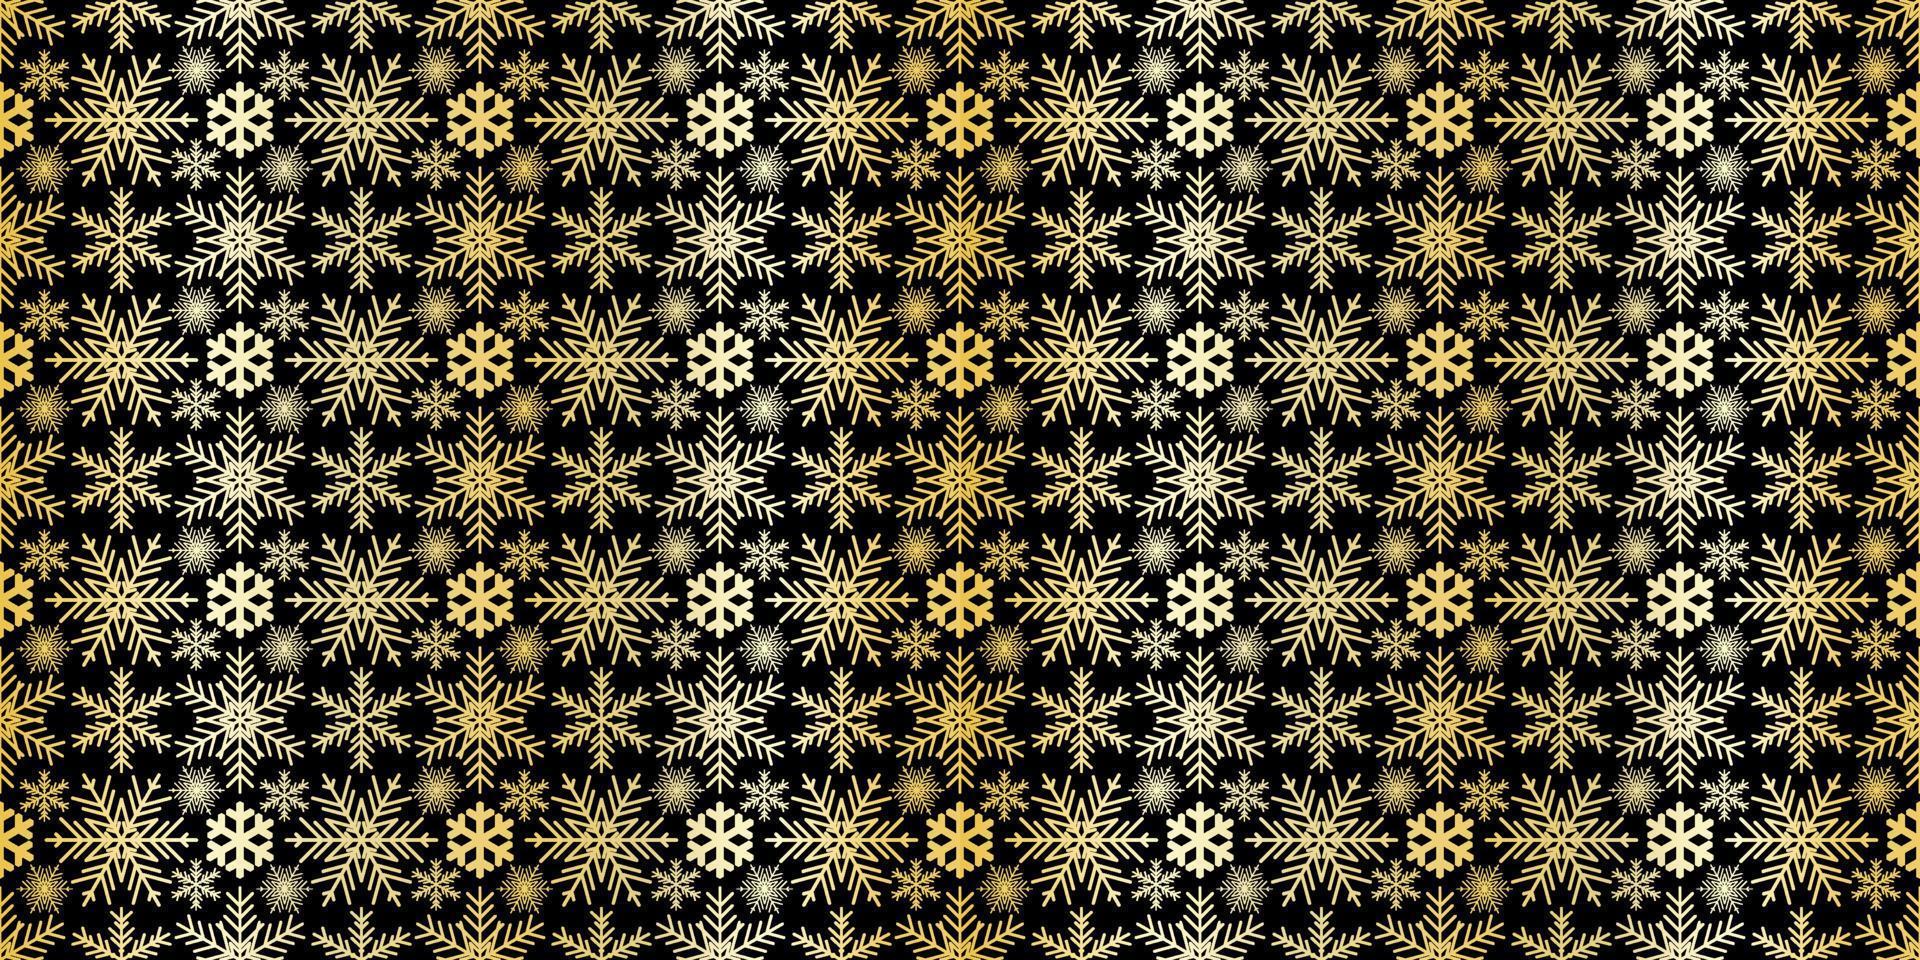 Vector Christmas card. Snowflakes background. Winter seamless pattern.